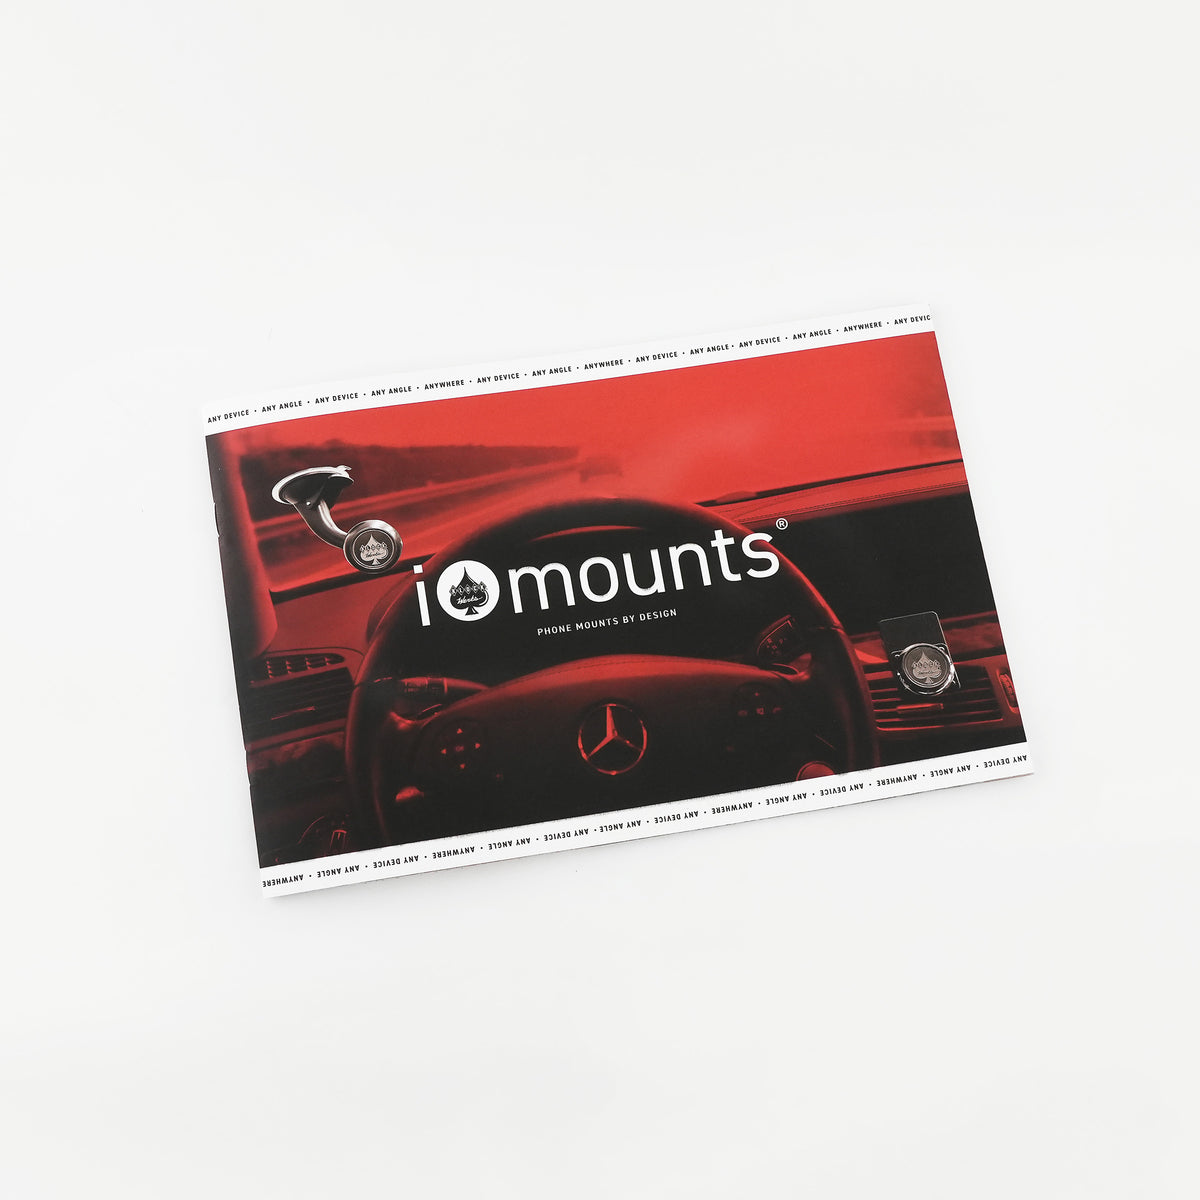 iOmounts® Magnetic Phone Mount complete product catalog cover